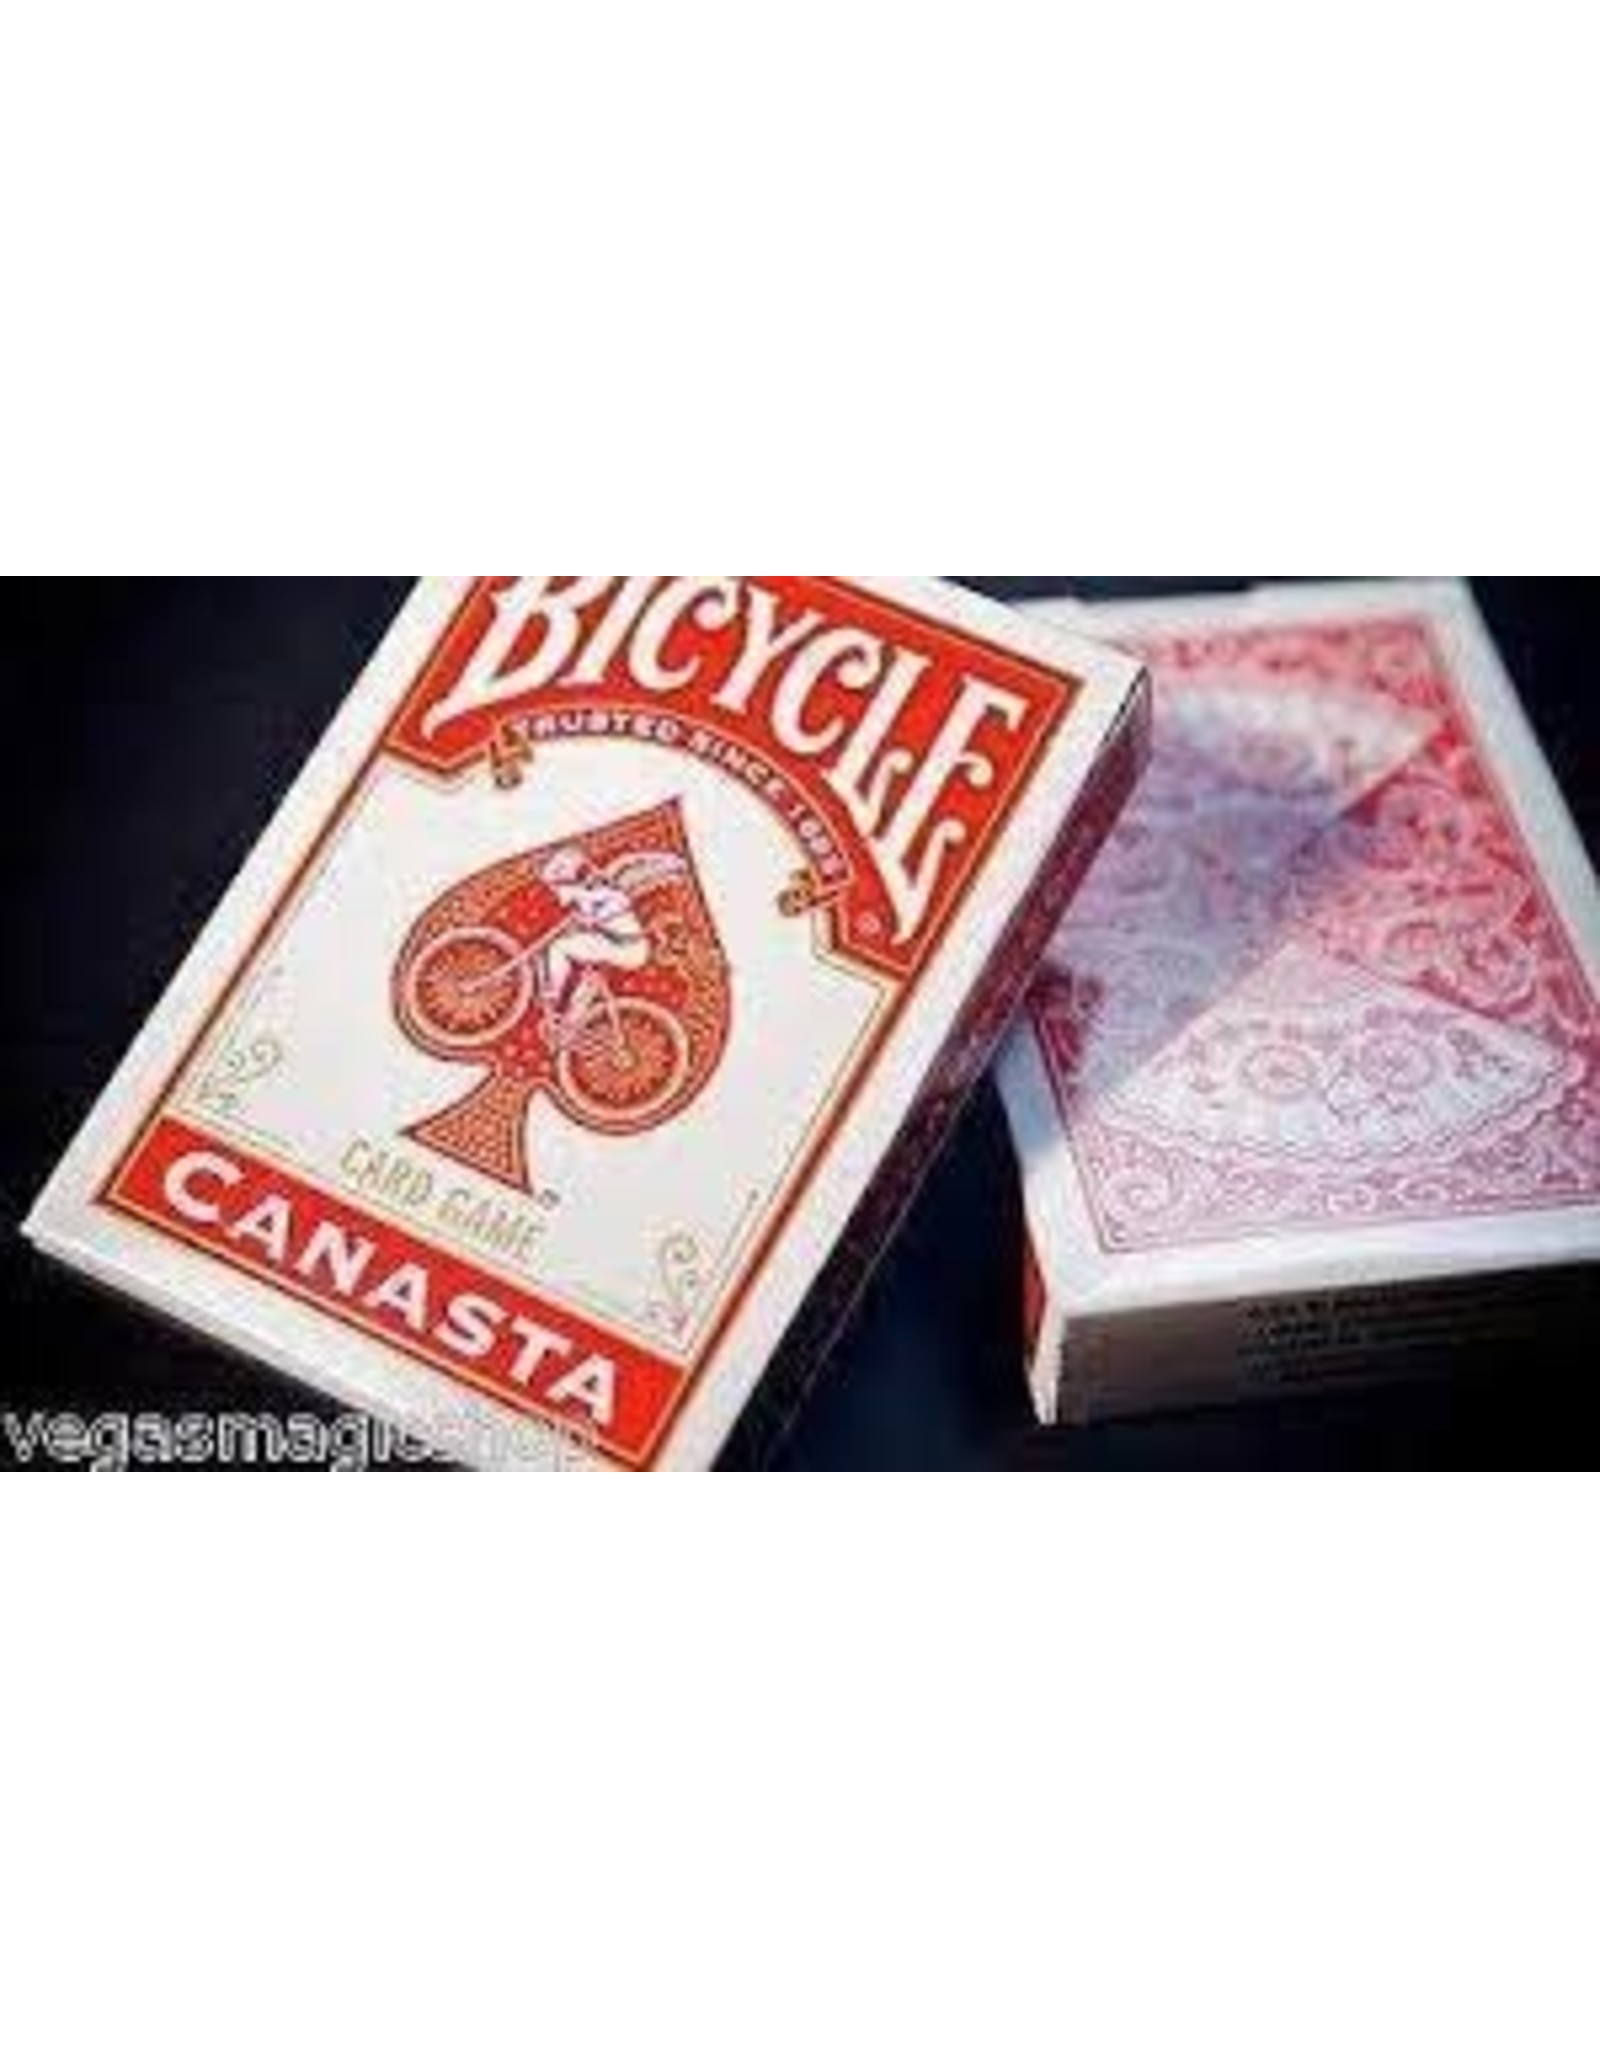 US Playing Card Co. Bicycle Canasta